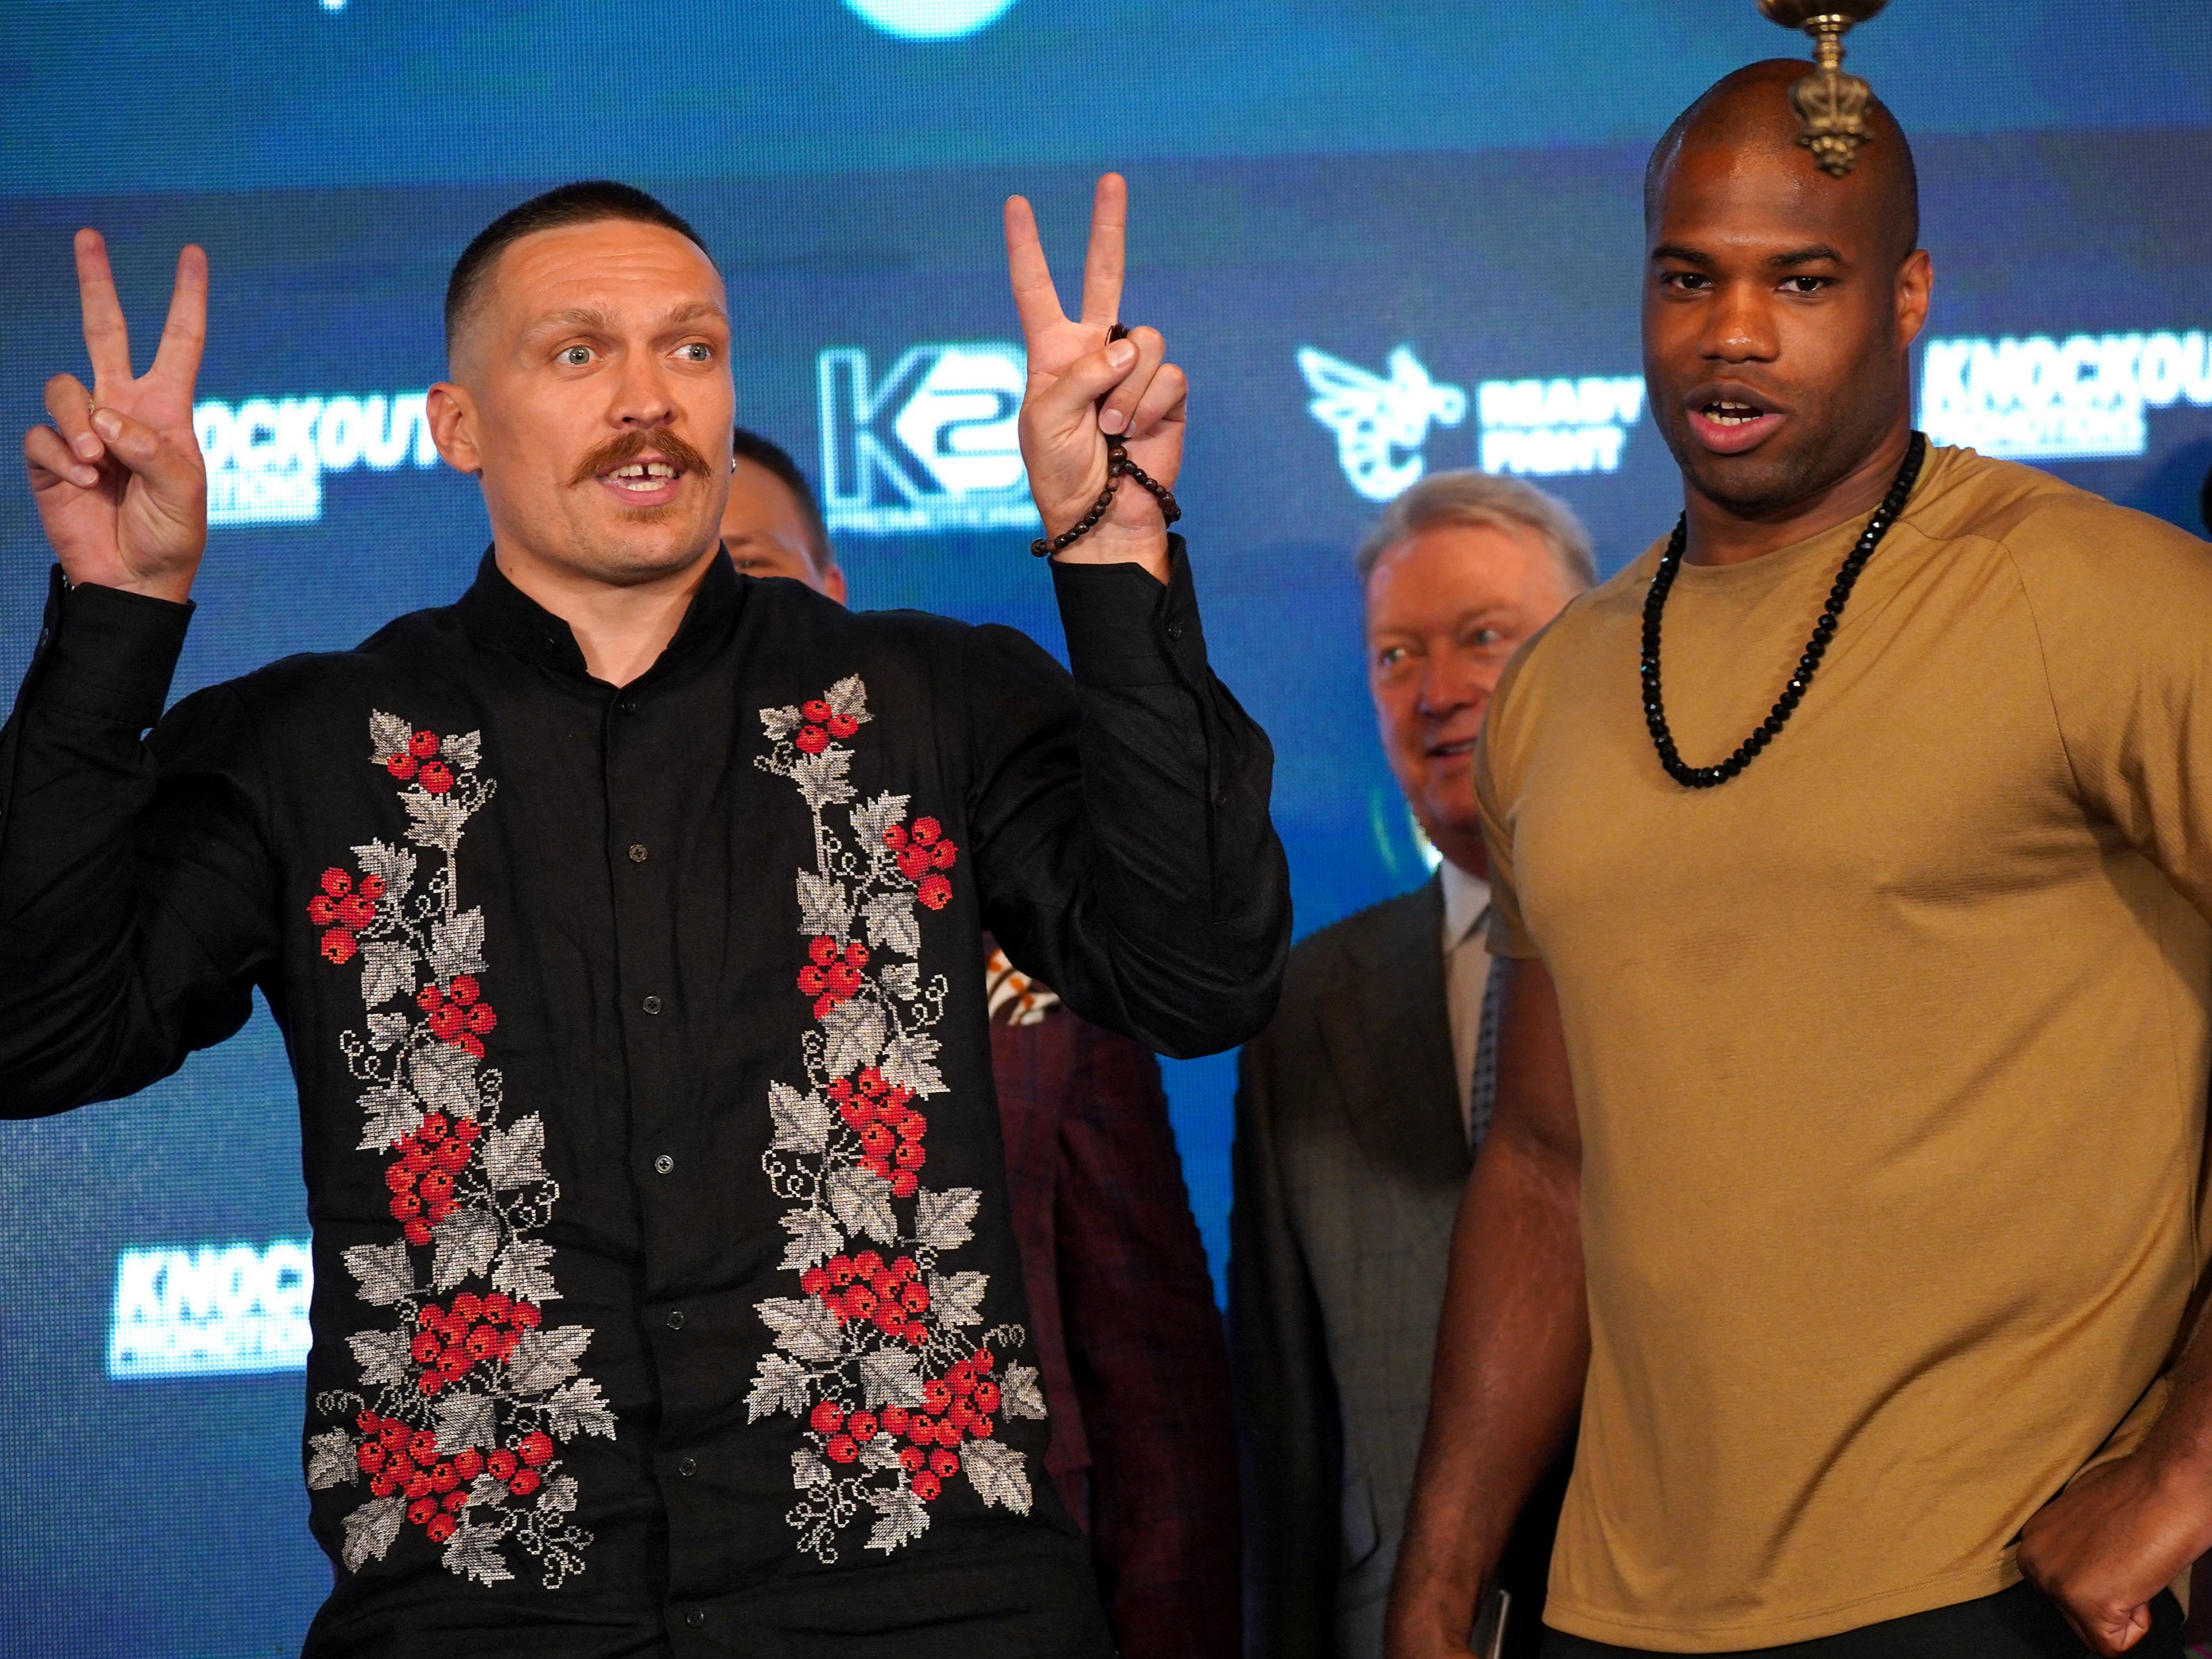 Usyk offered a surprising moment of levity at his first press conference with Dubois